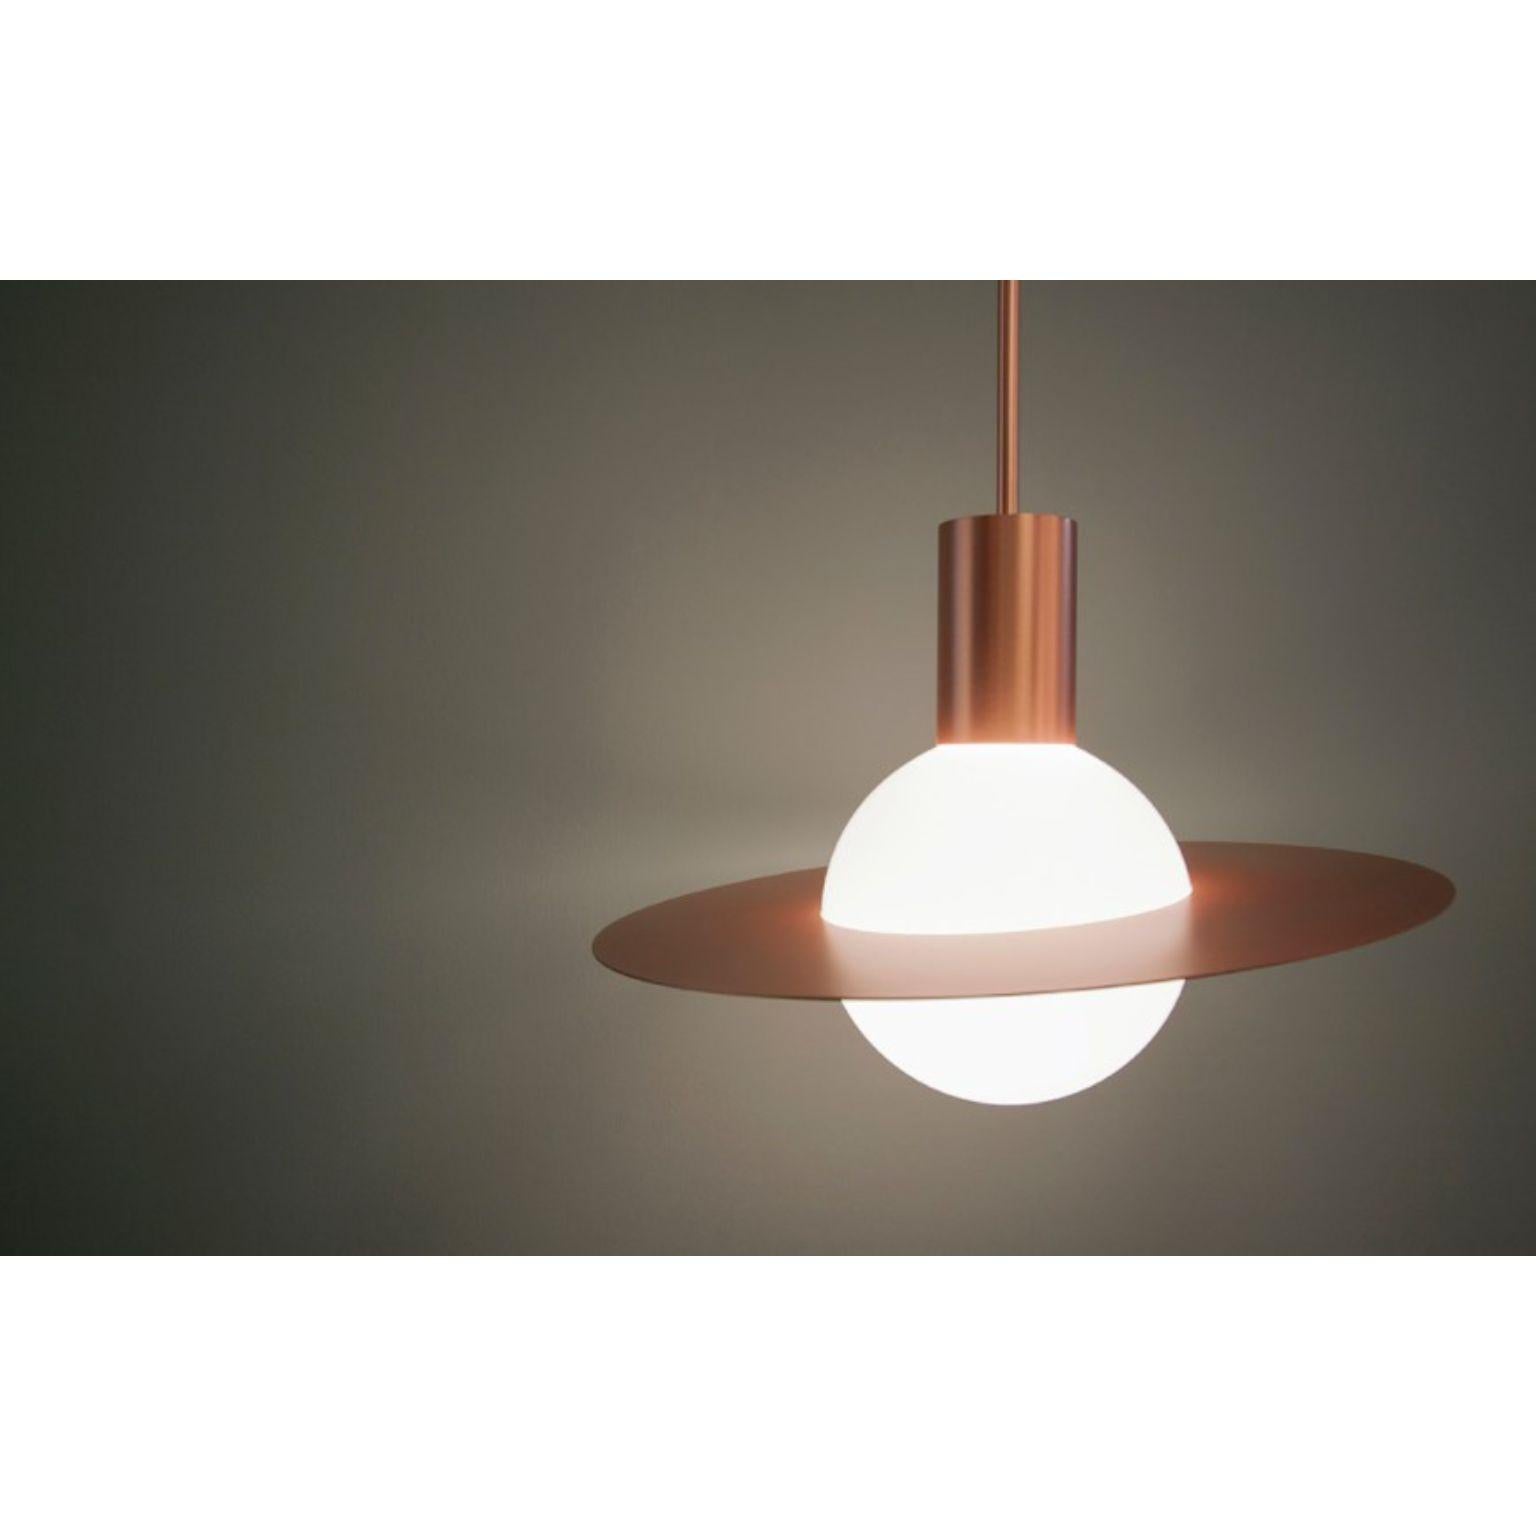 Saturne Pendant by Hervé Langlais
Dimensions: D45x H220.3 cm
Materials: Solid brass, Opal mouth-blown glass, Textile cable.
Others finishes and dimensions are available.

All our lamps can be wired according to each country. If sold to the USA